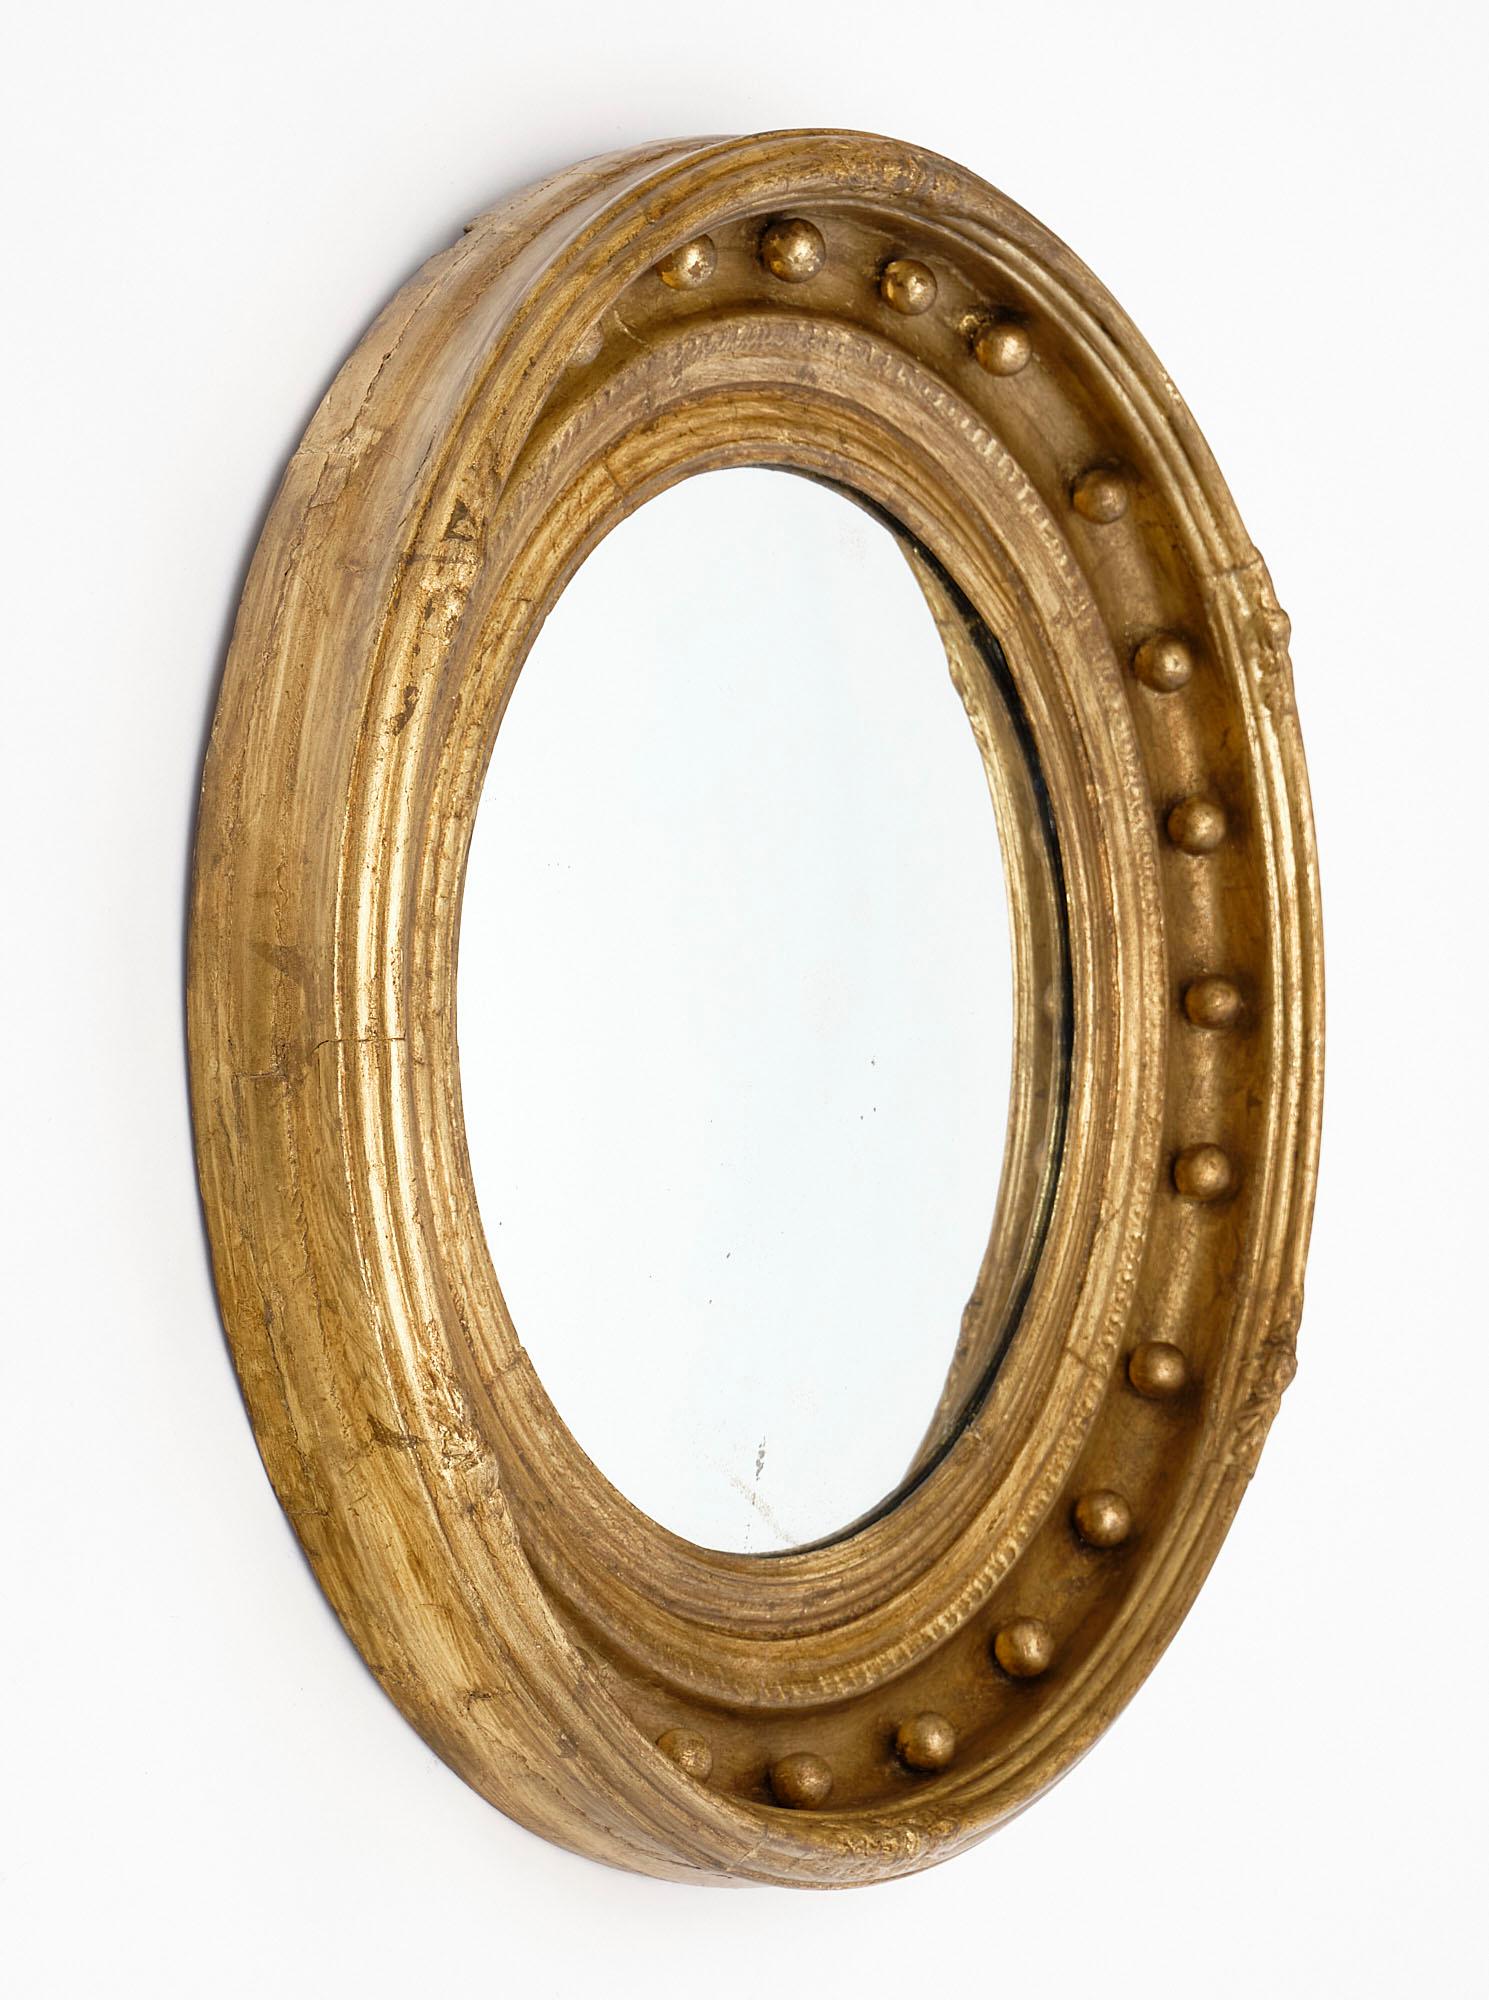 Gold leafed French antique mirror with a hand carved frame that has been gold leafed and the original central convex mirror.